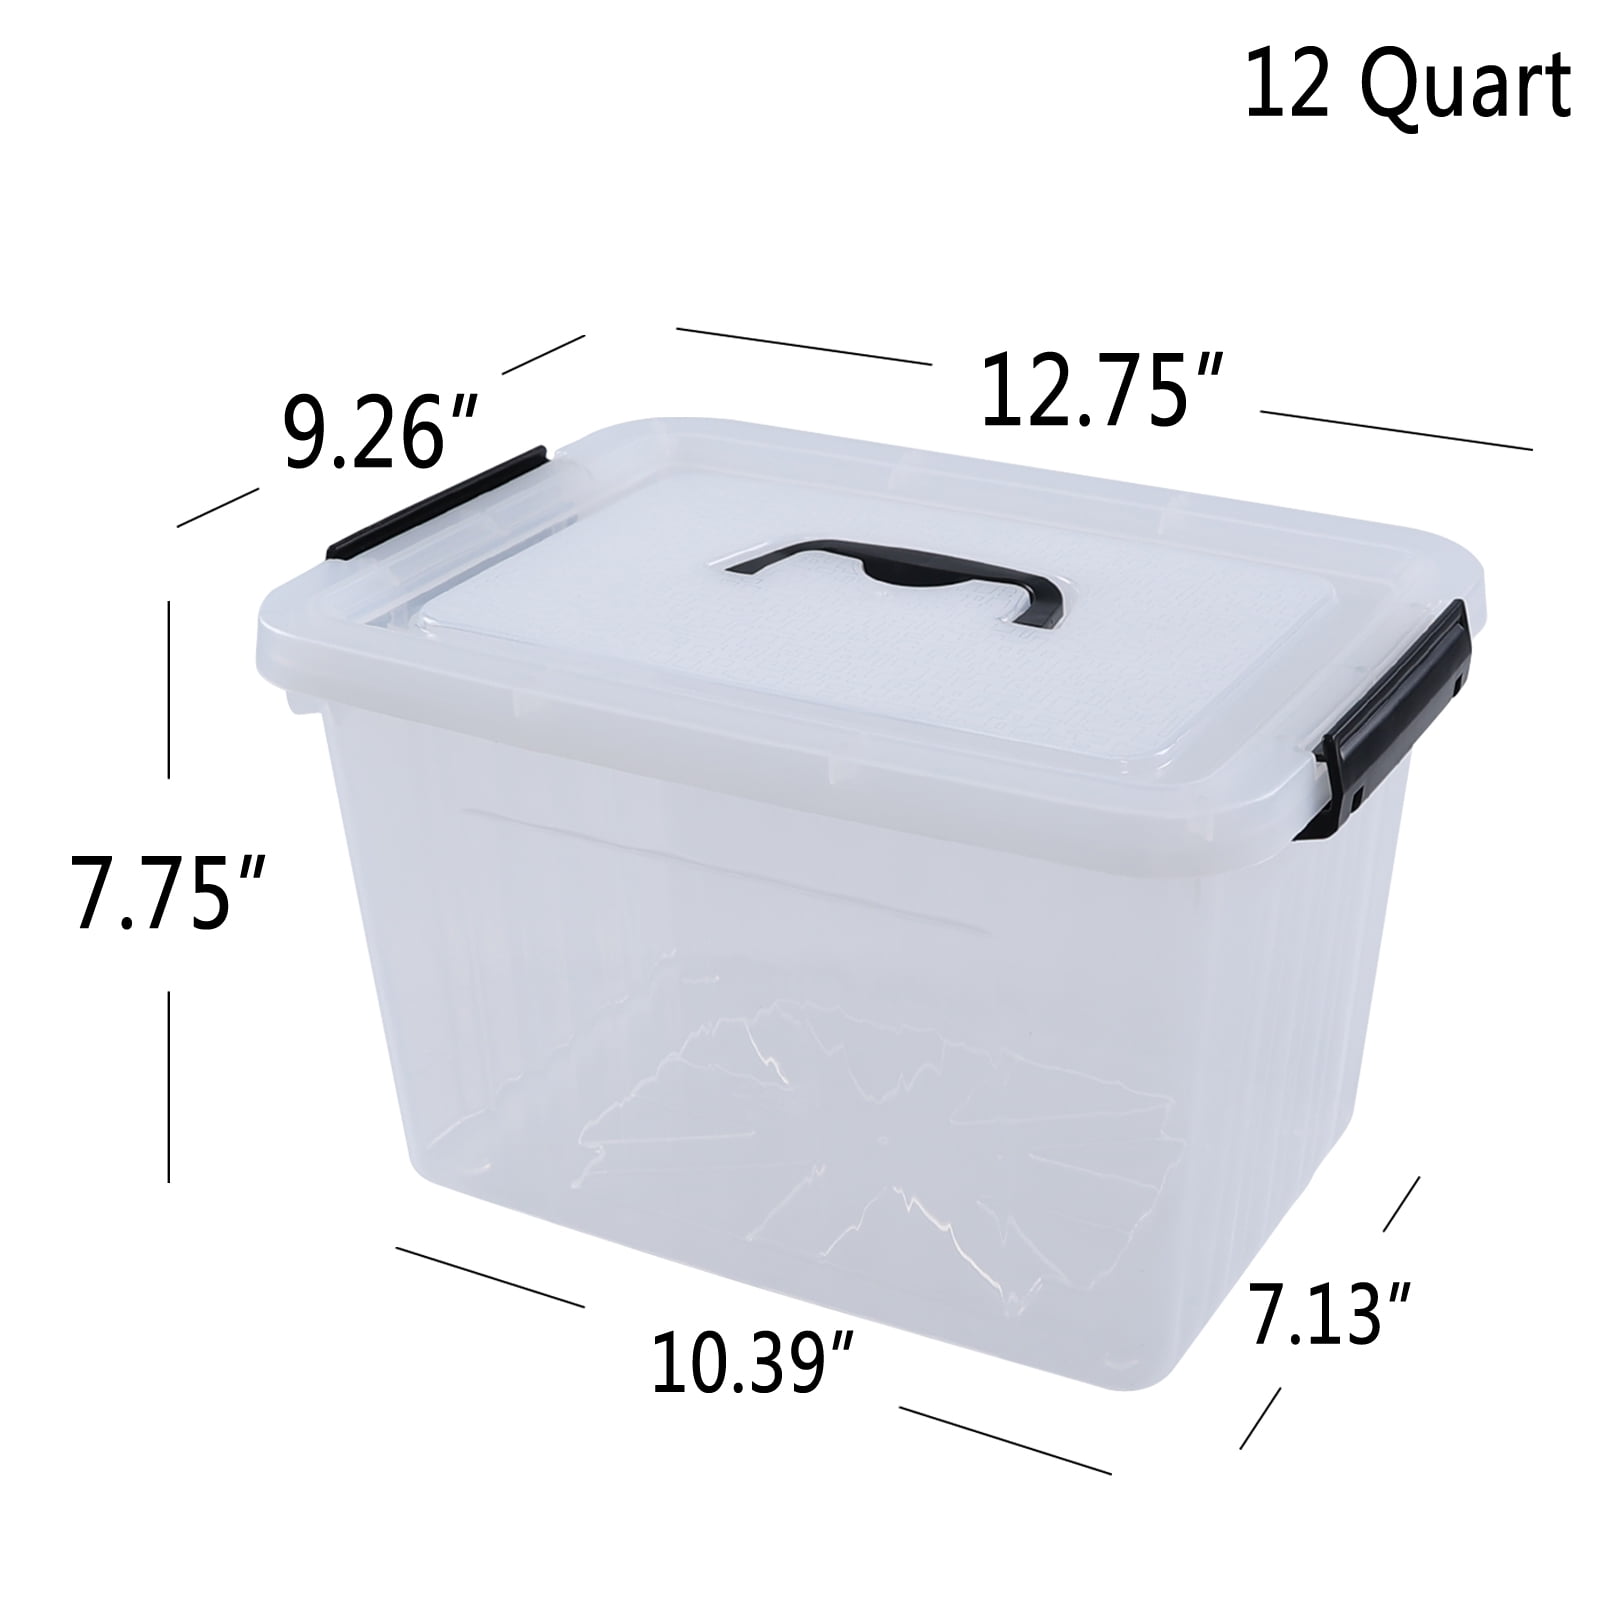 Anbers 12 Quart Clear Plastic Bin with Lid, Latching Box with Handle, Set of 1